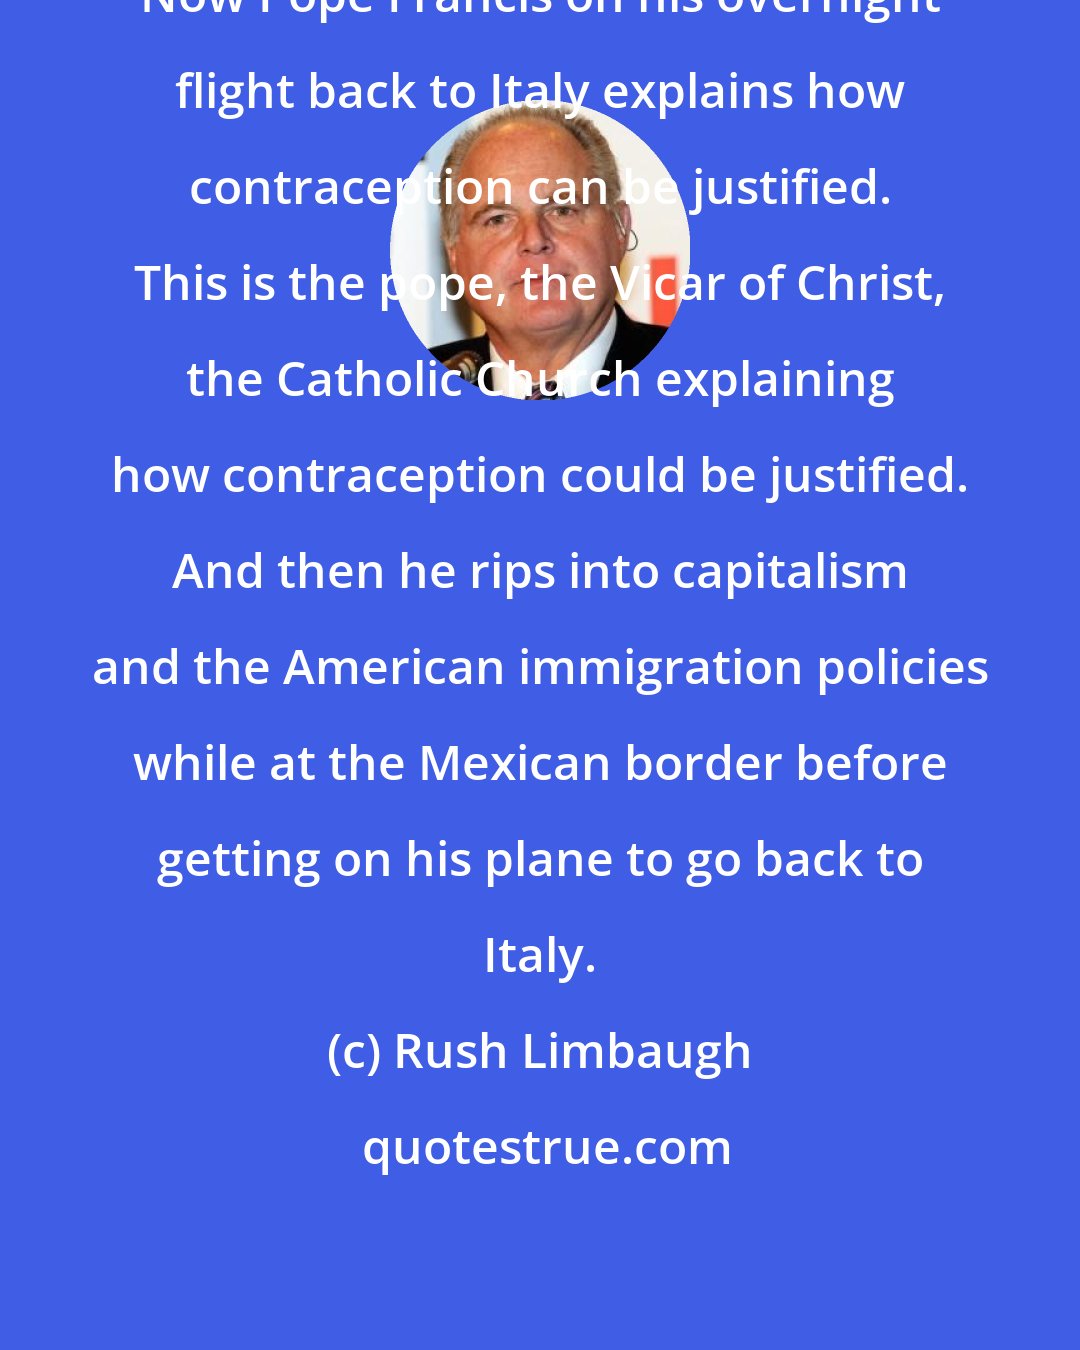 Rush Limbaugh: Now Pope Francis on his overnight flight back to Italy explains how contraception can be justified. This is the pope, the Vicar of Christ, the Catholic Church explaining how contraception could be justified. And then he rips into capitalism and the American immigration policies while at the Mexican border before getting on his plane to go back to Italy.